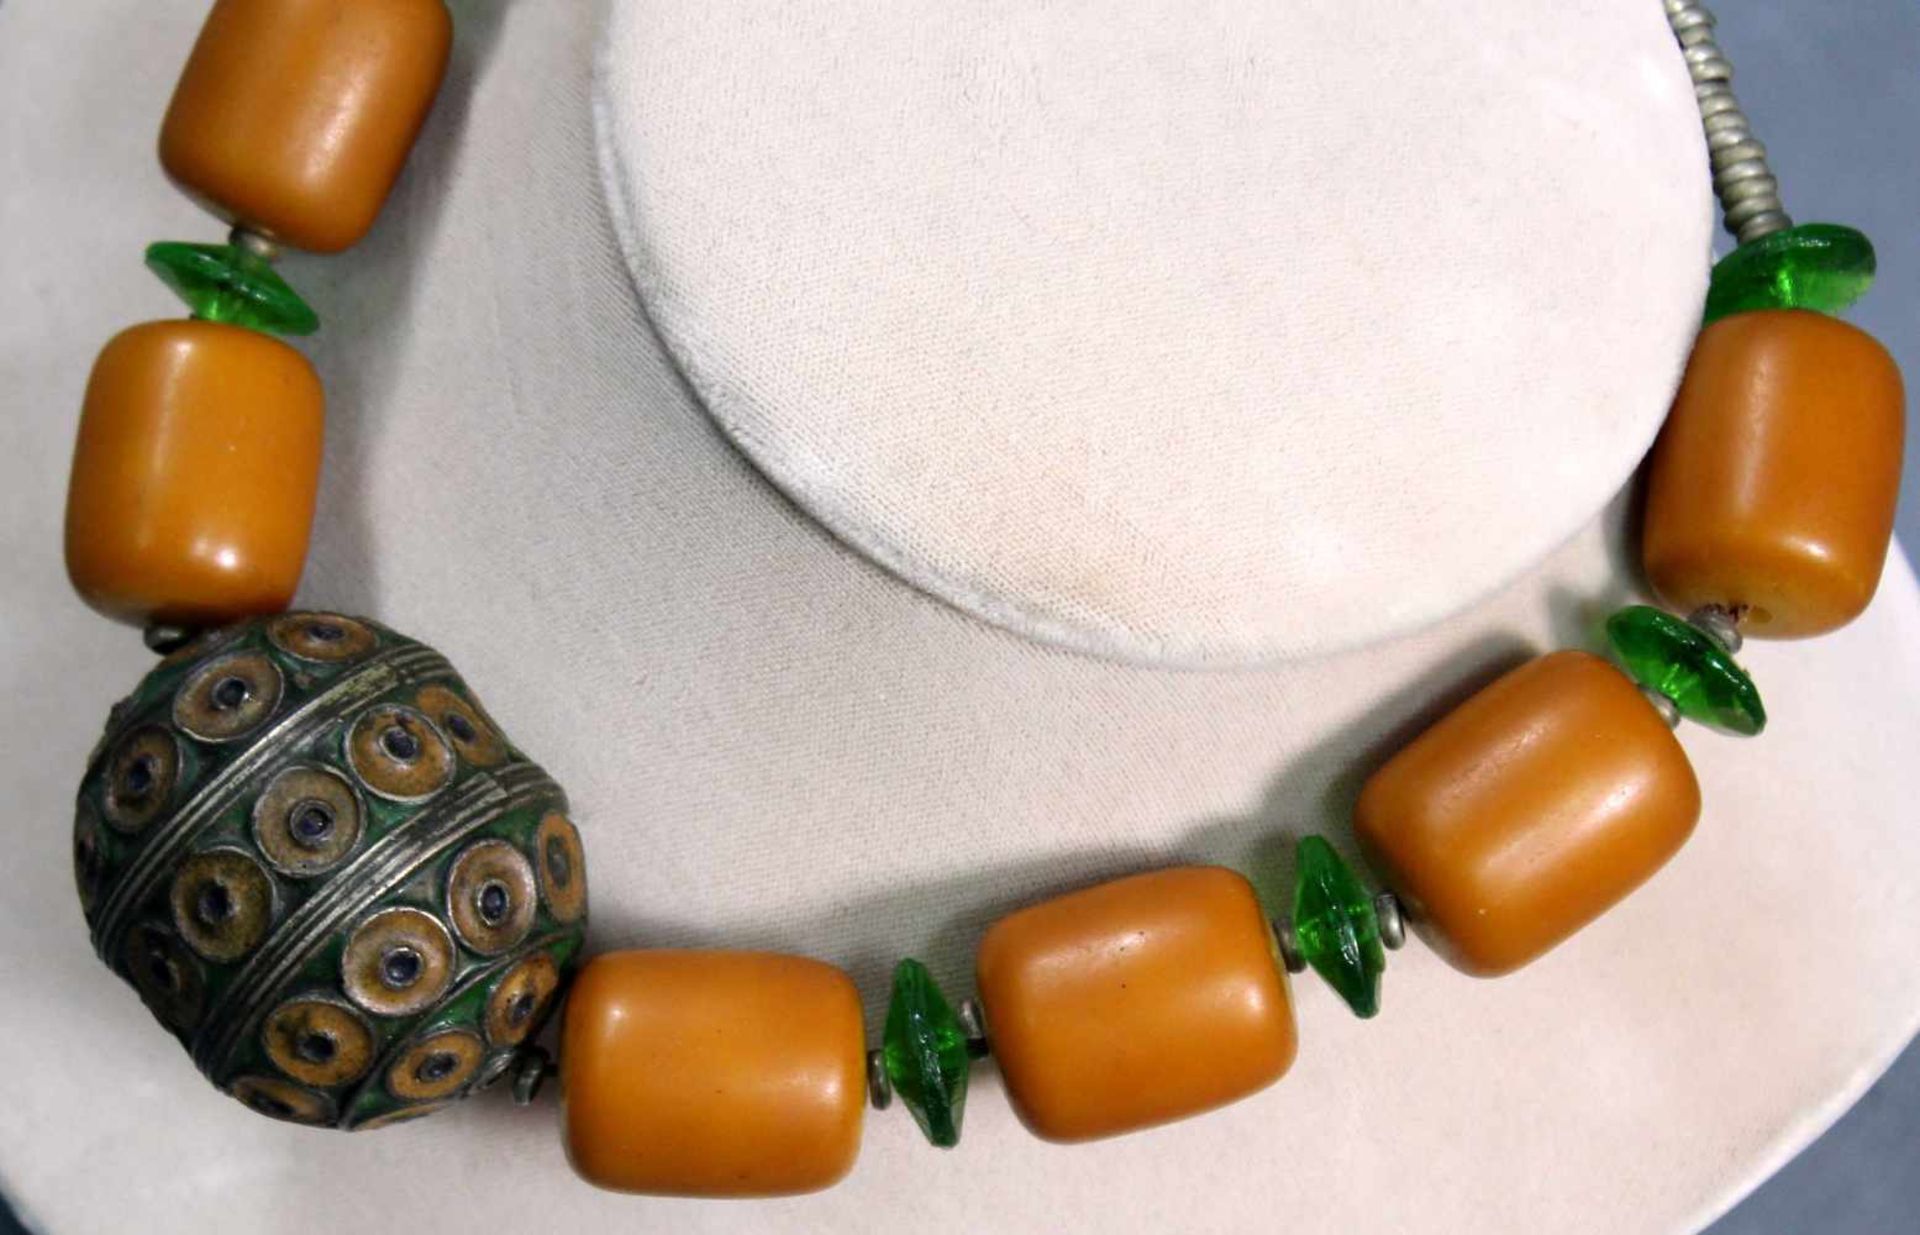 Amber necklace with metal main ball and green glass spacers - Image 2 of 5